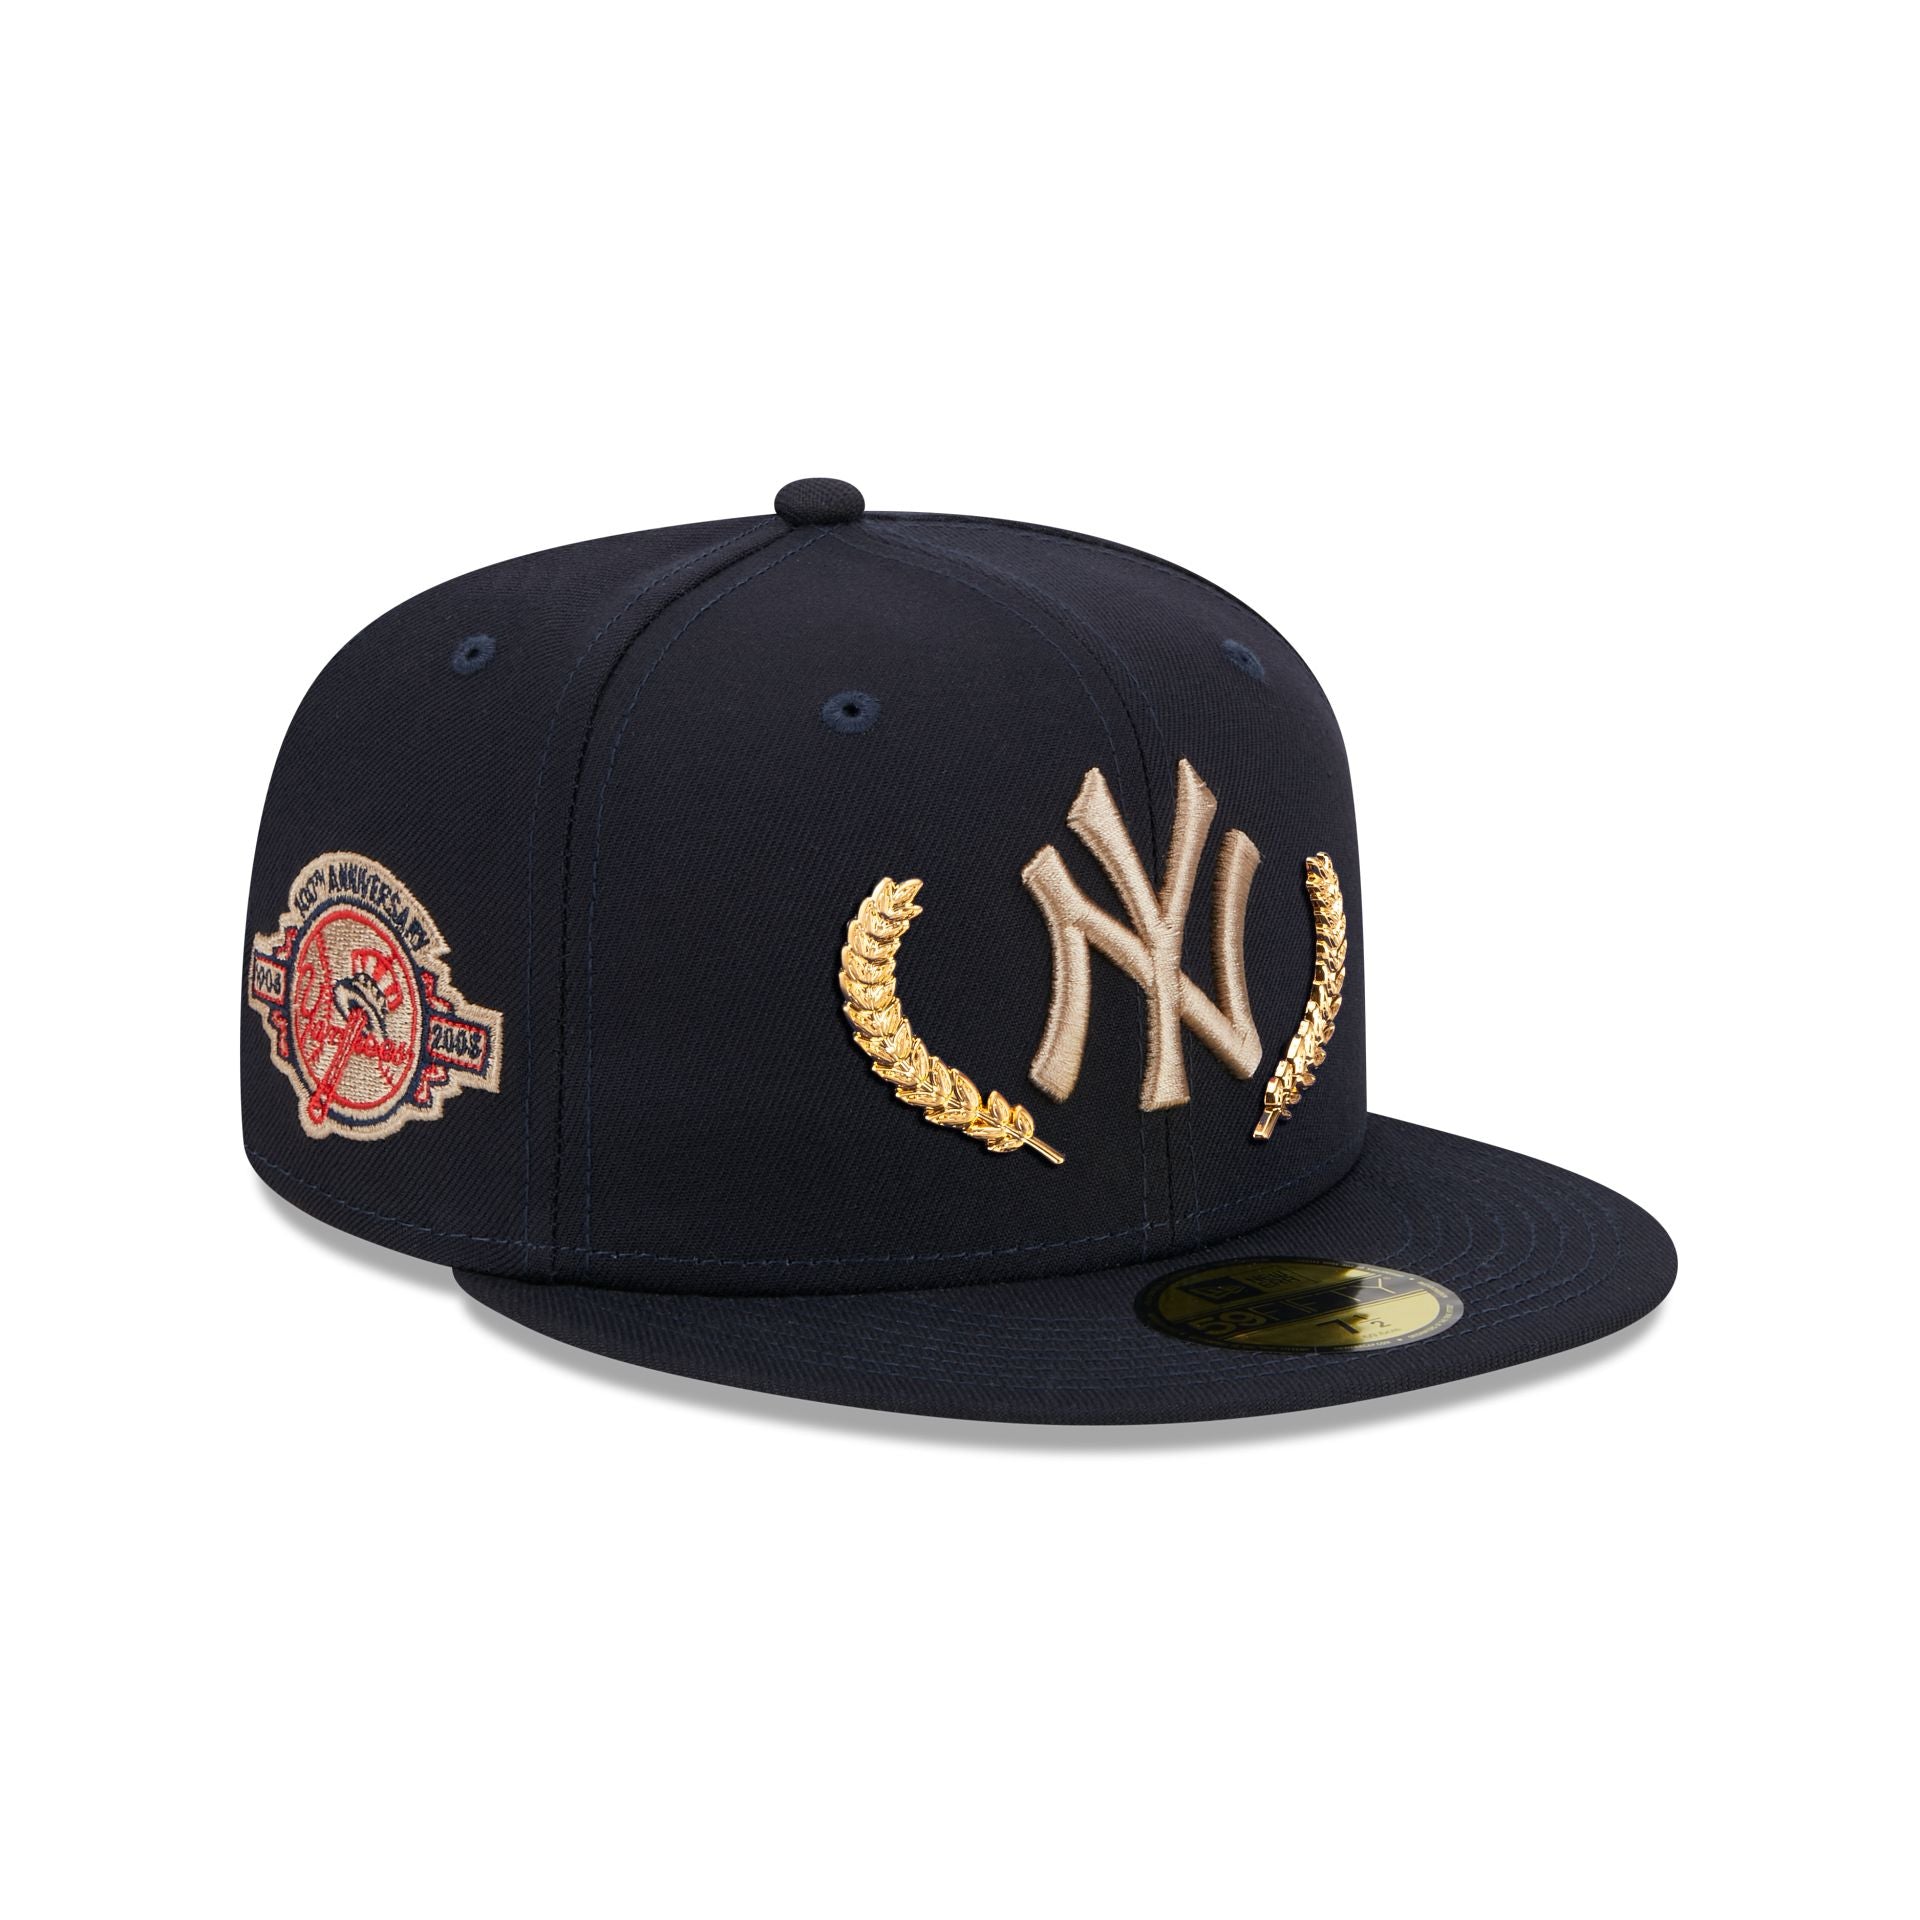 Men's New Era Black/Gold York Yankees 59FIFTY Fitted Hat